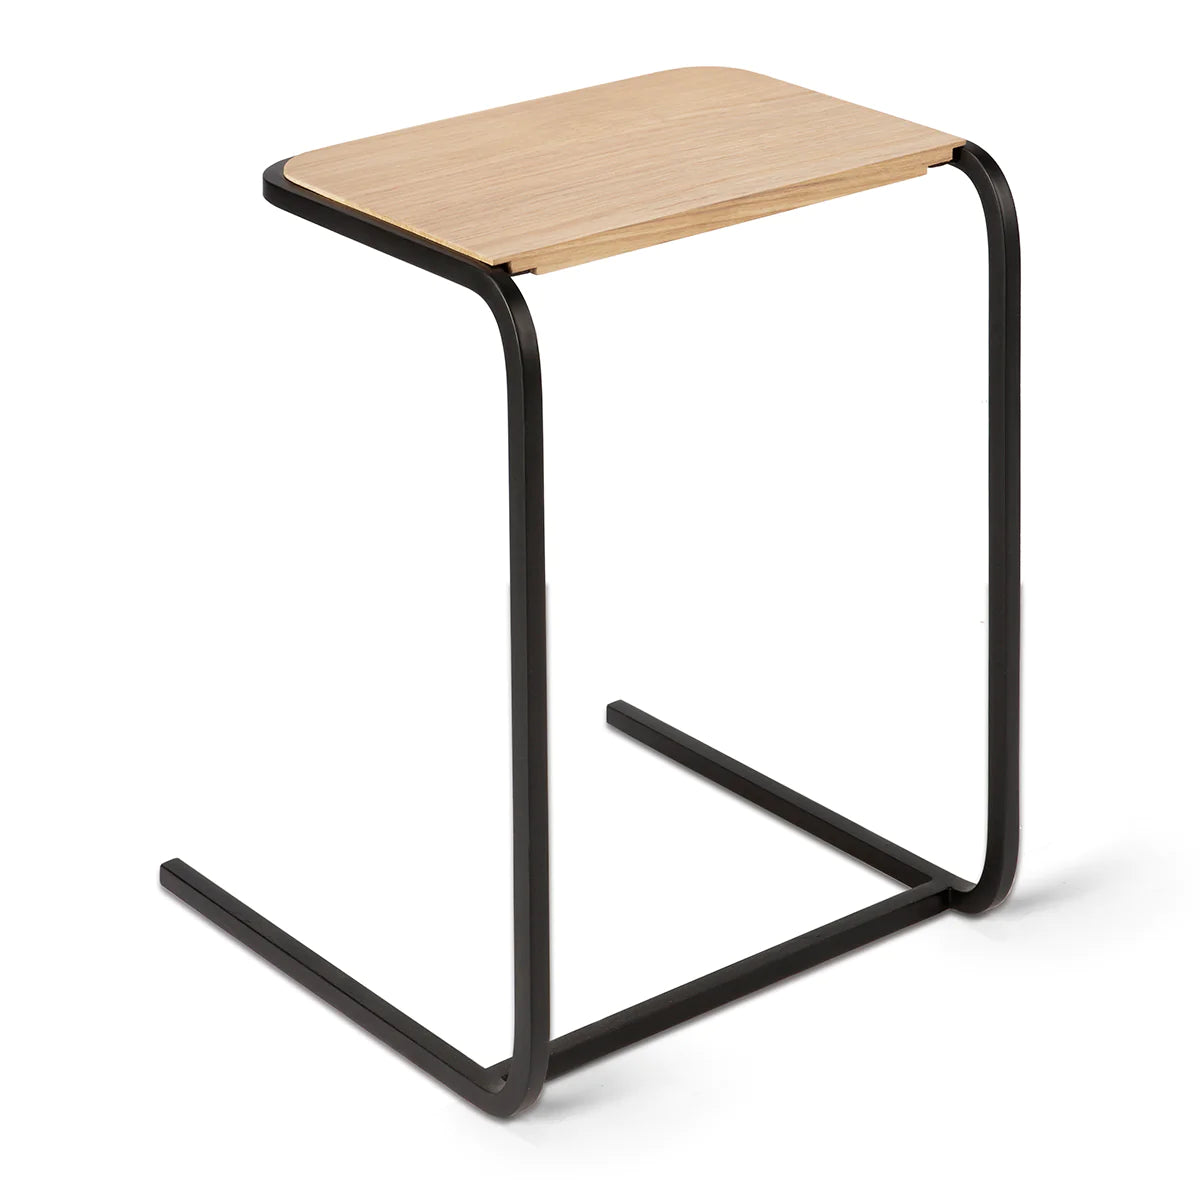 Oak N701 Ethnicraft Side Table available from Make Your House A Home, Bendigo, Victoria, Australia